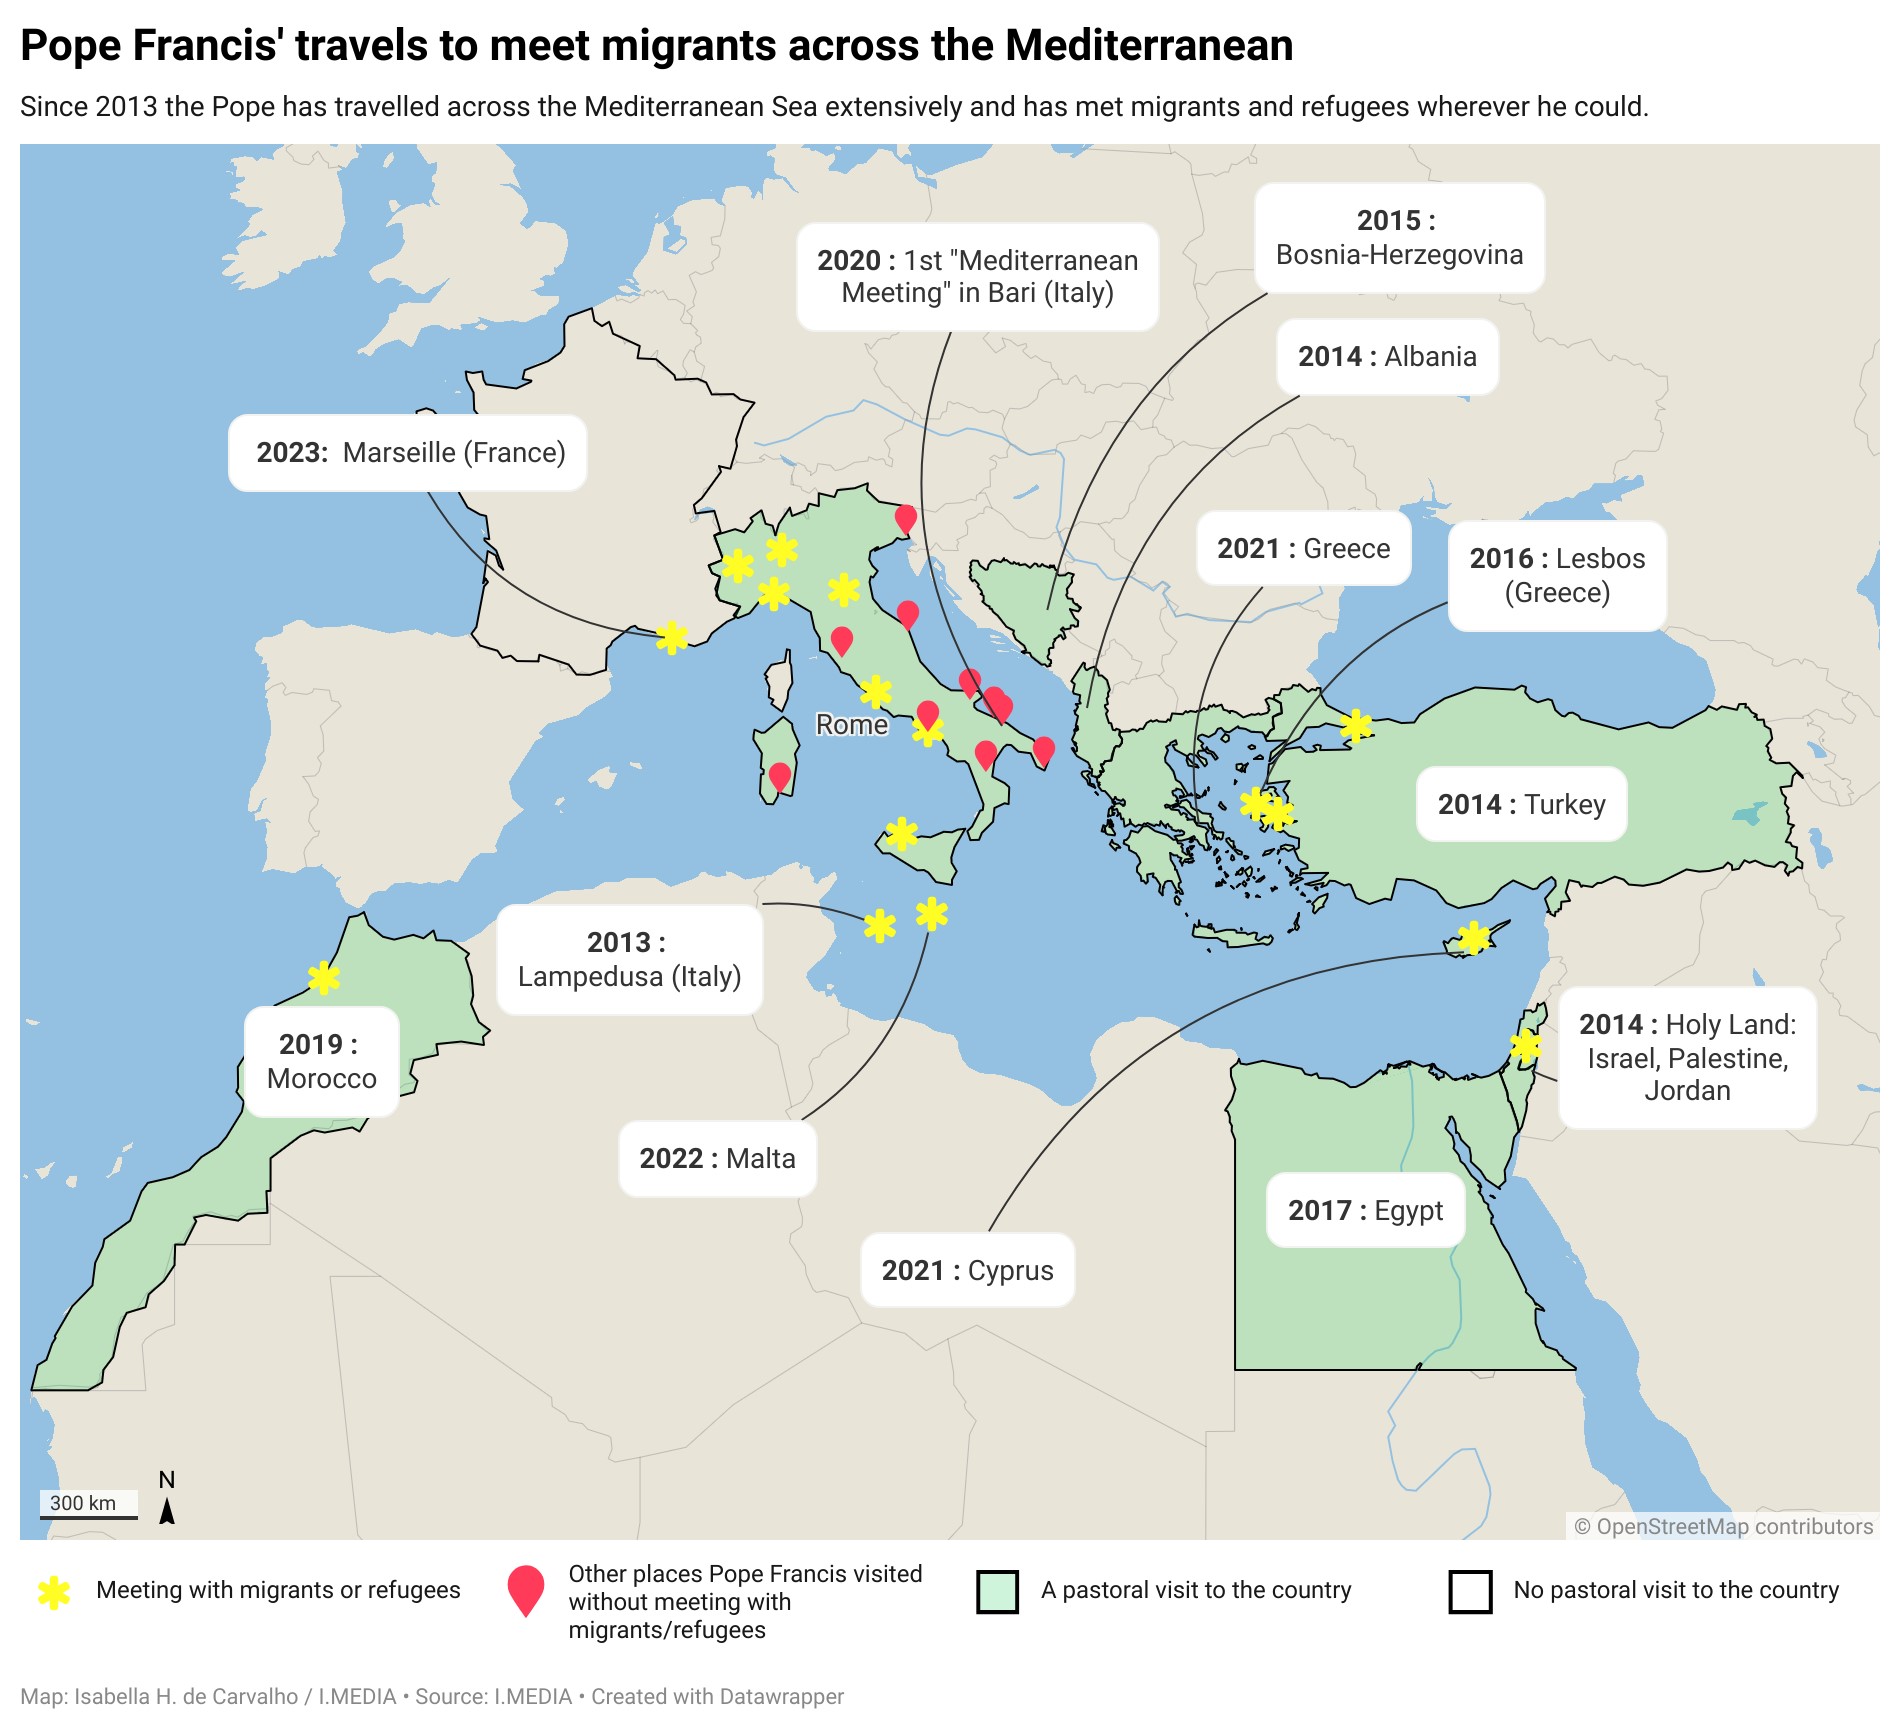 A map showing Pope Francis' travels across the Mediterranean with special markers on where he has met with migrants.